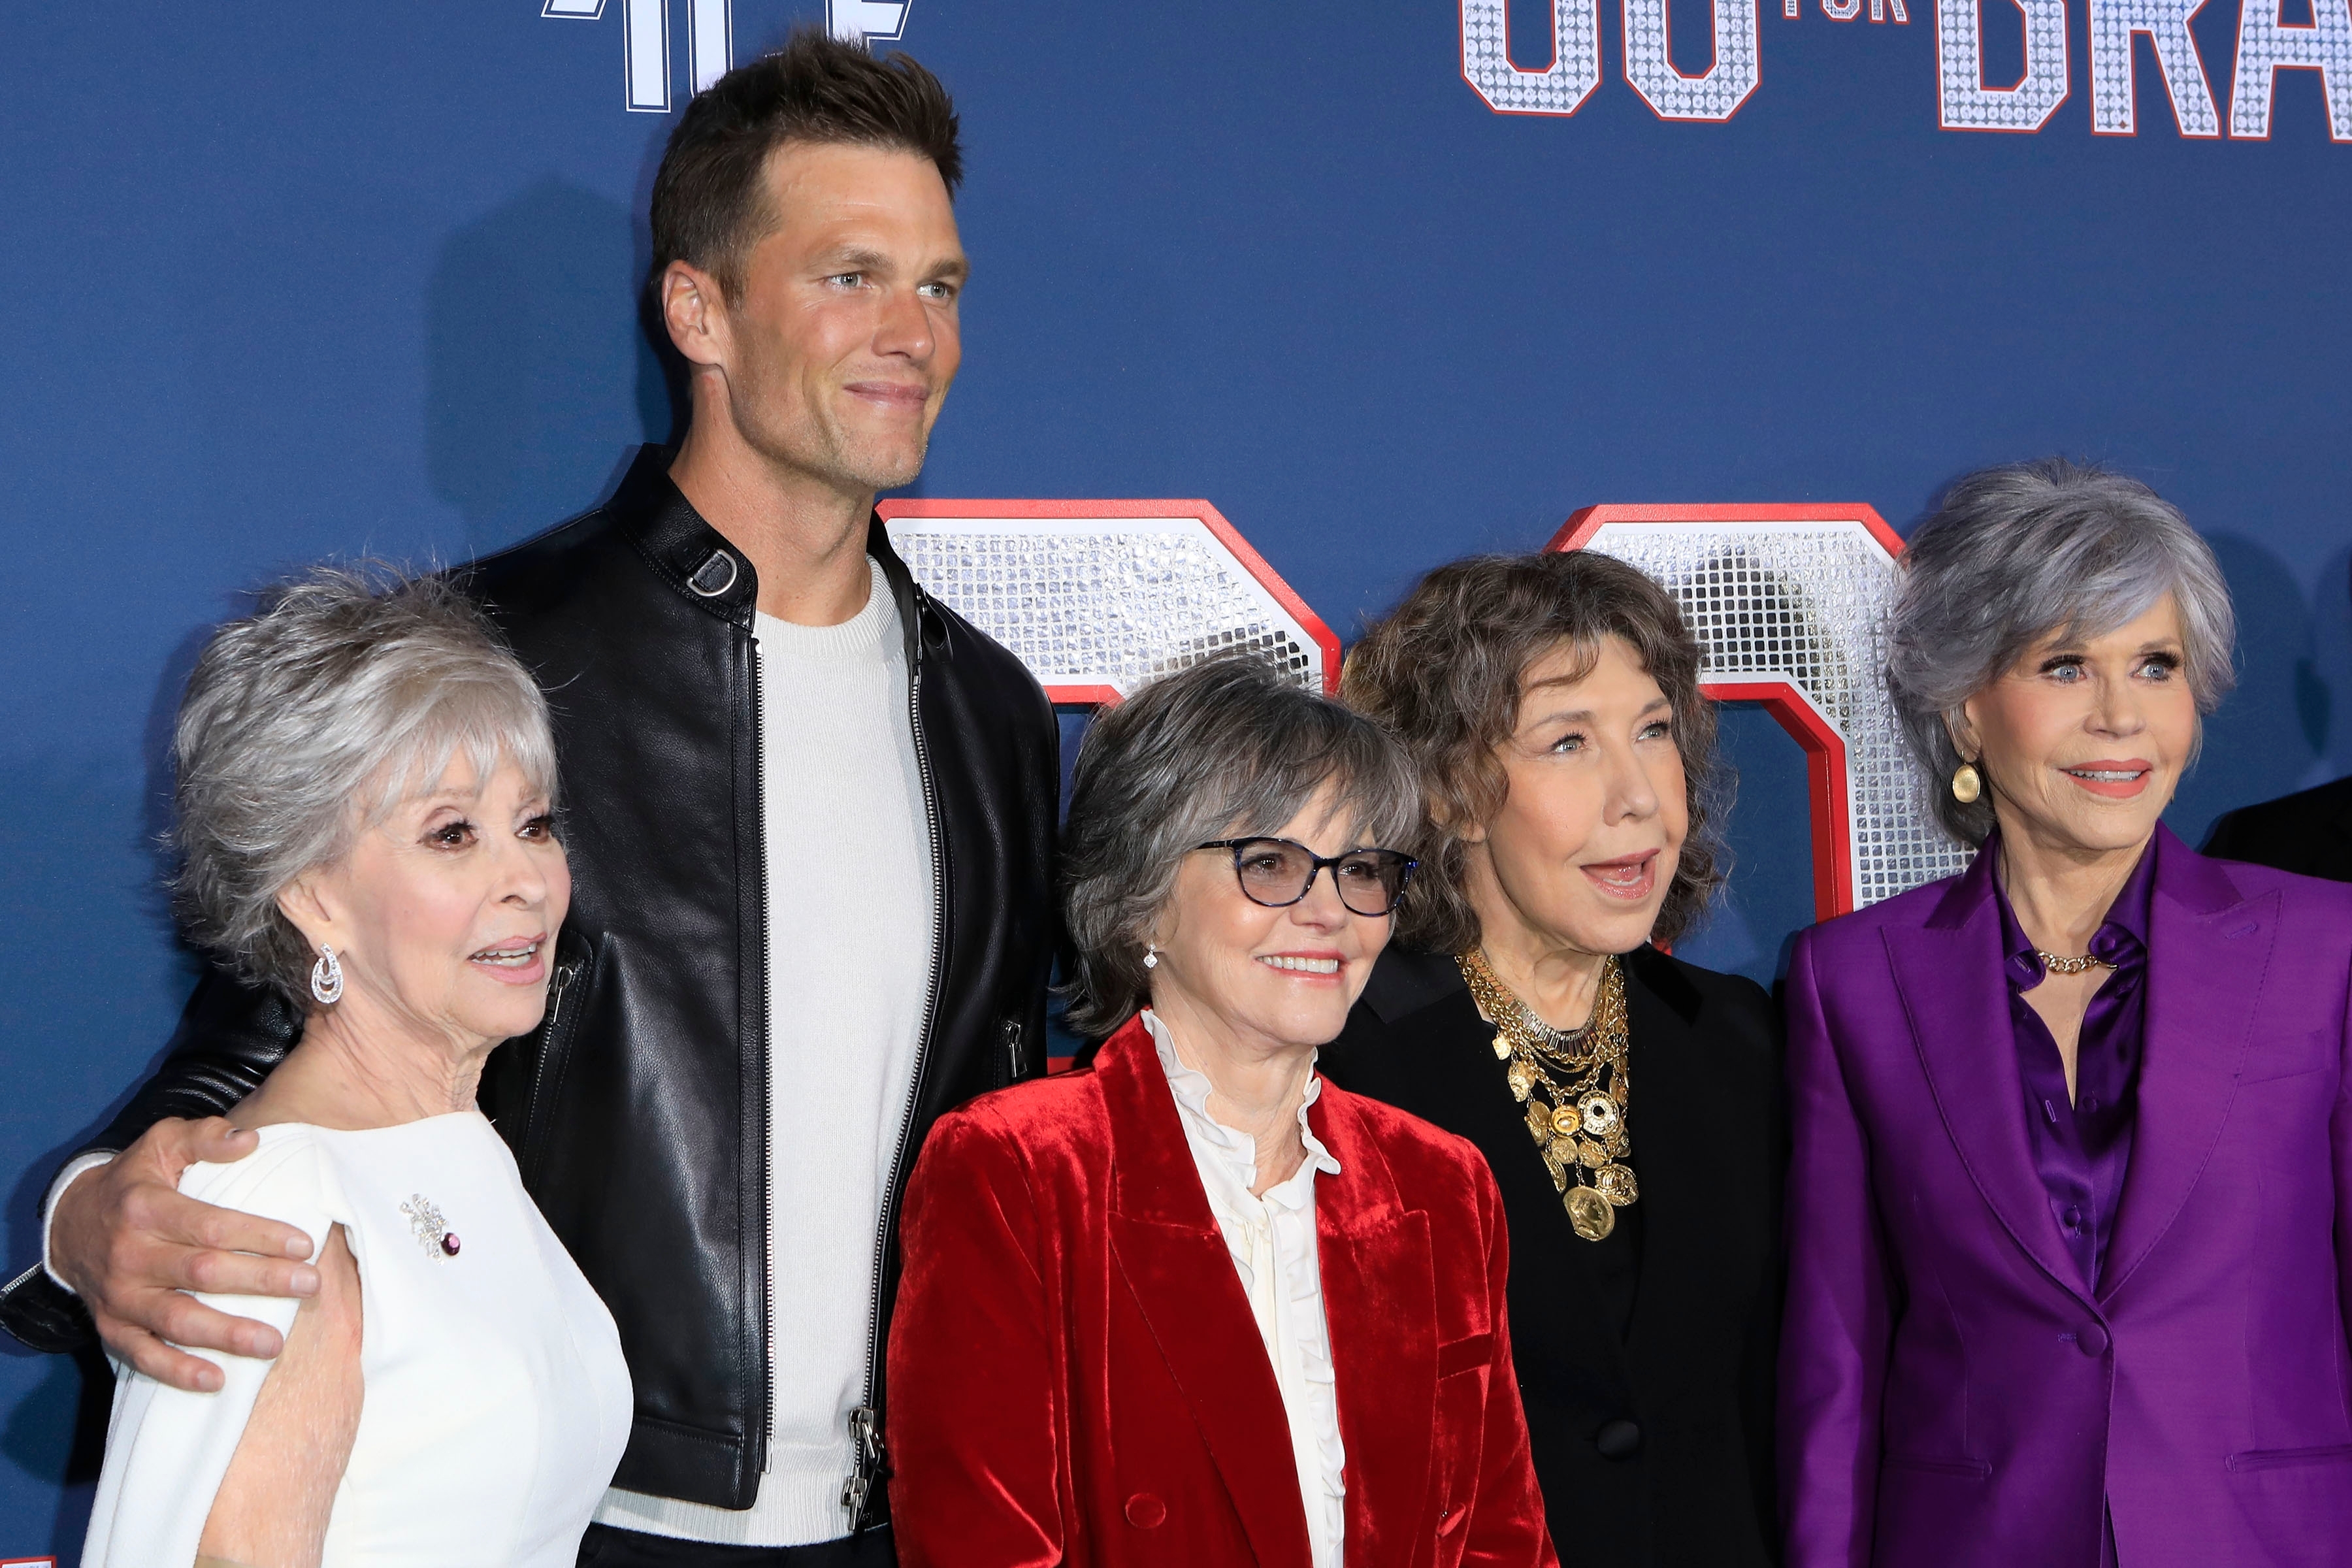 Celebrity QB Tom Brady’s Mother’s Day share includes mom, and exes, Gisele Bündchen and Bridget Moynahan, web fans are touched